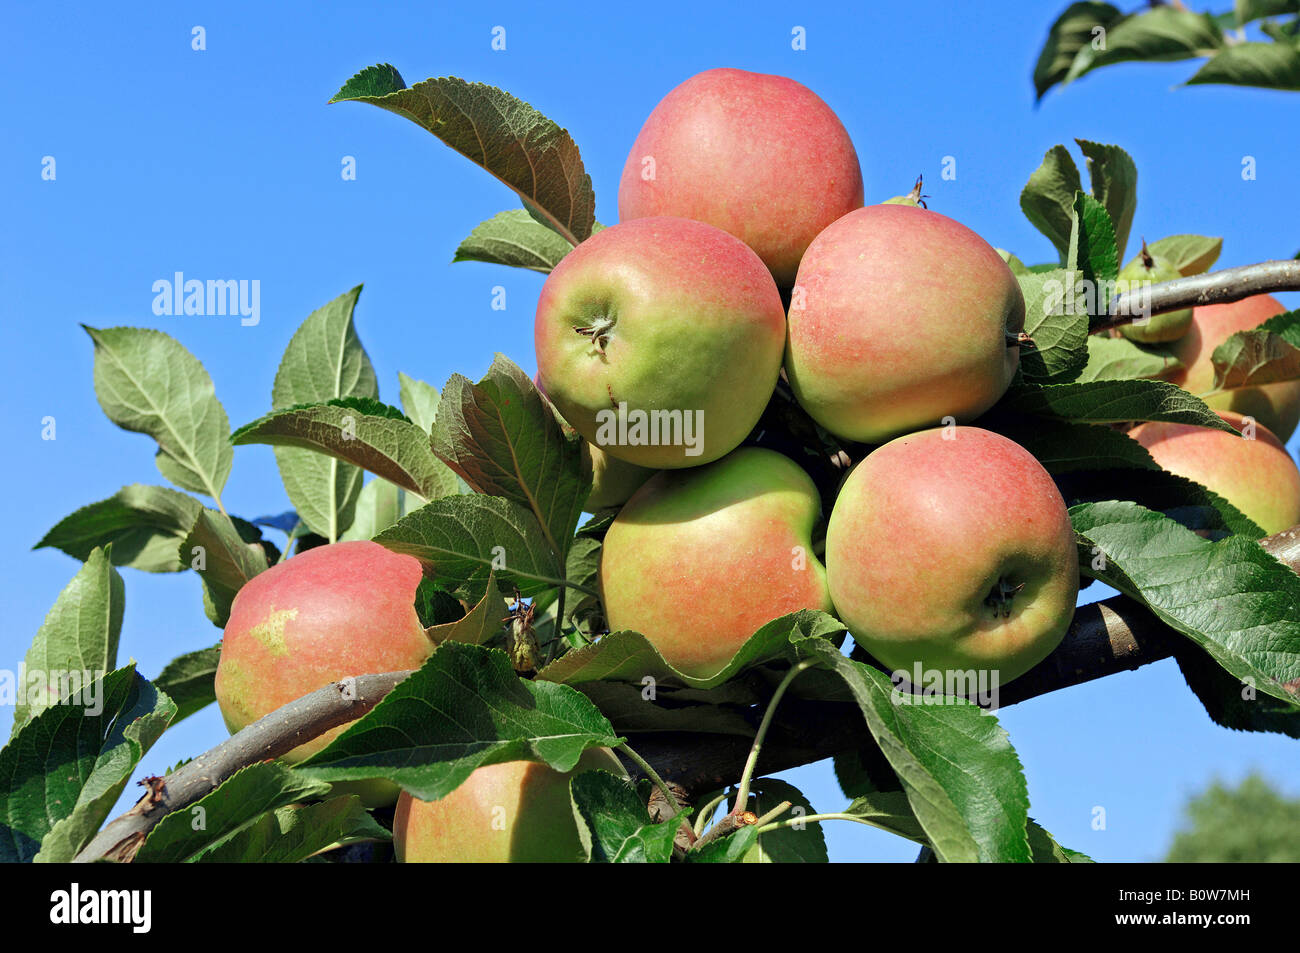 Ripe apples (Malus) on a tree, Altes Land, Lower Saxony, Germany, Europe Stock Photo